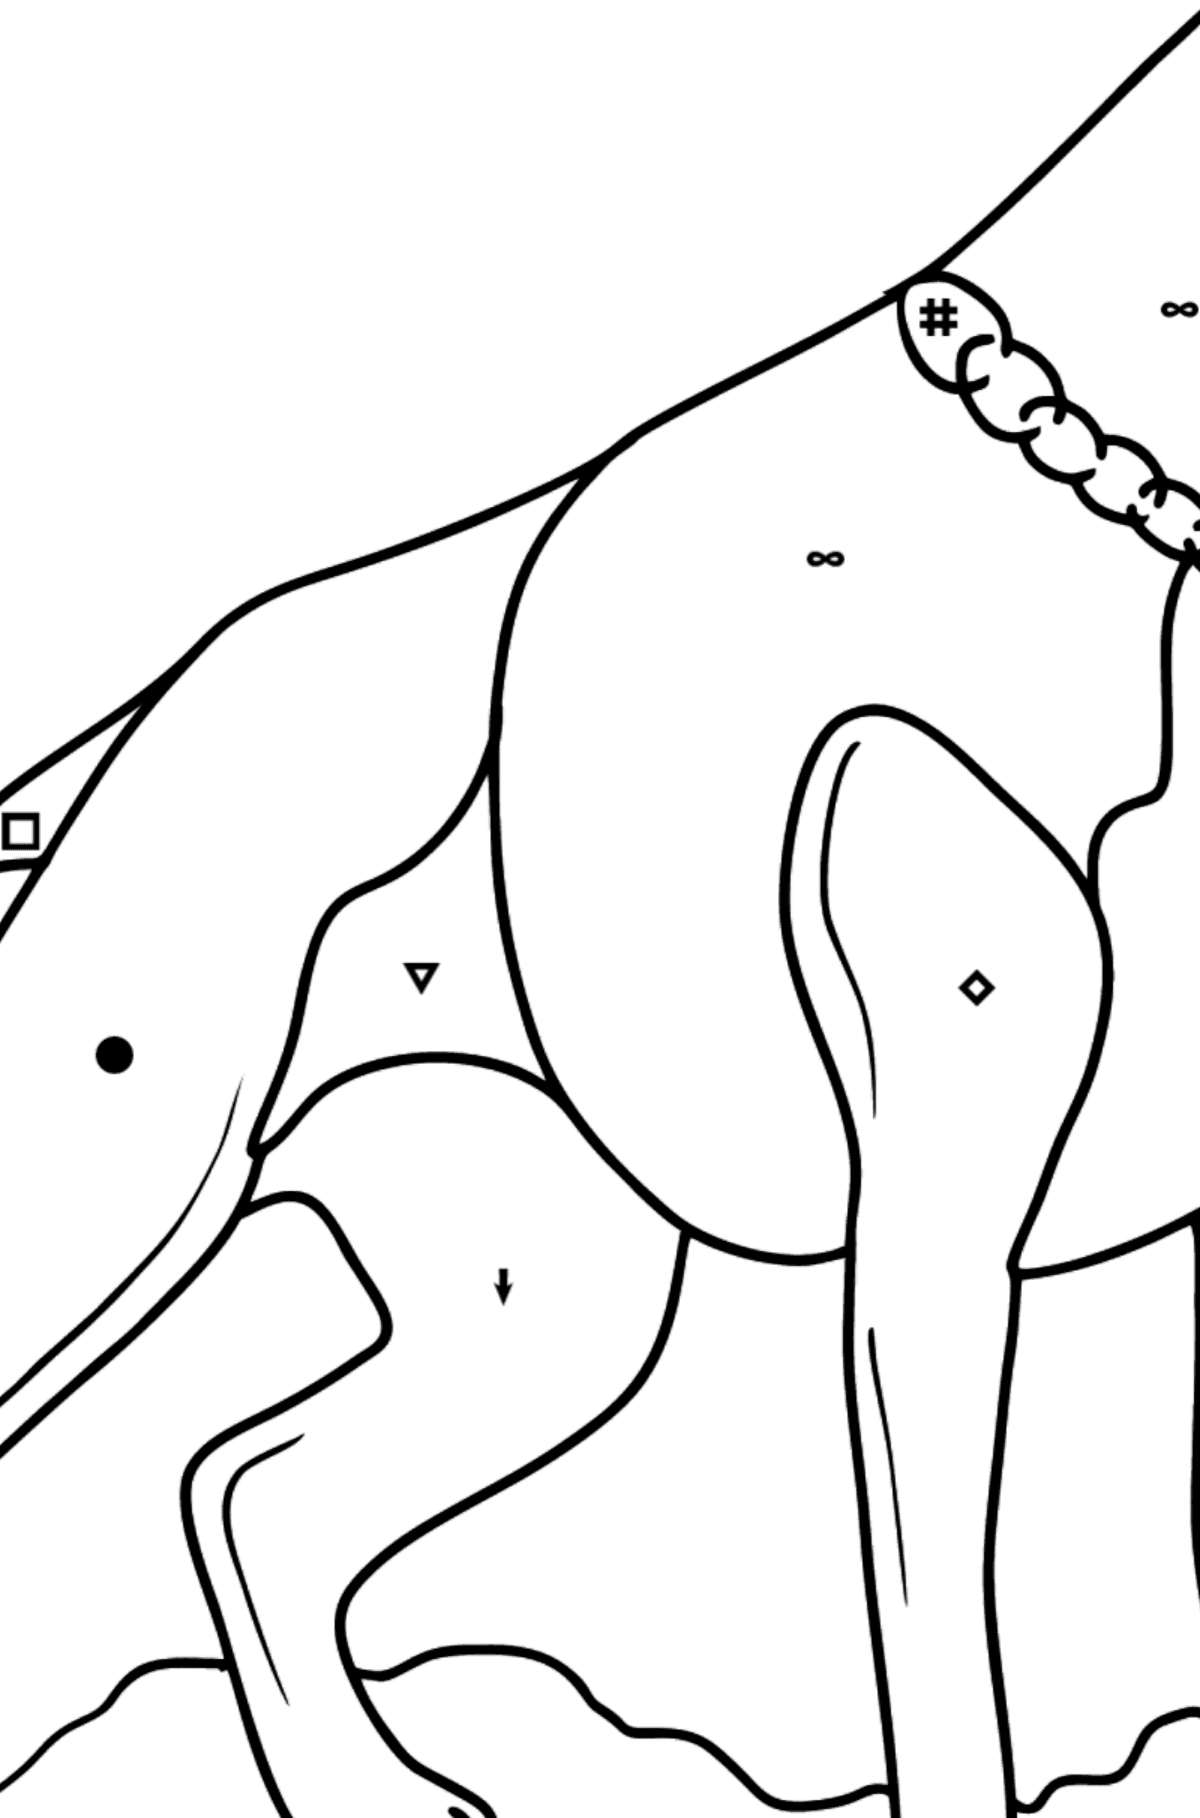 Boxer Dog coloring page - Coloring by Symbols for Kids